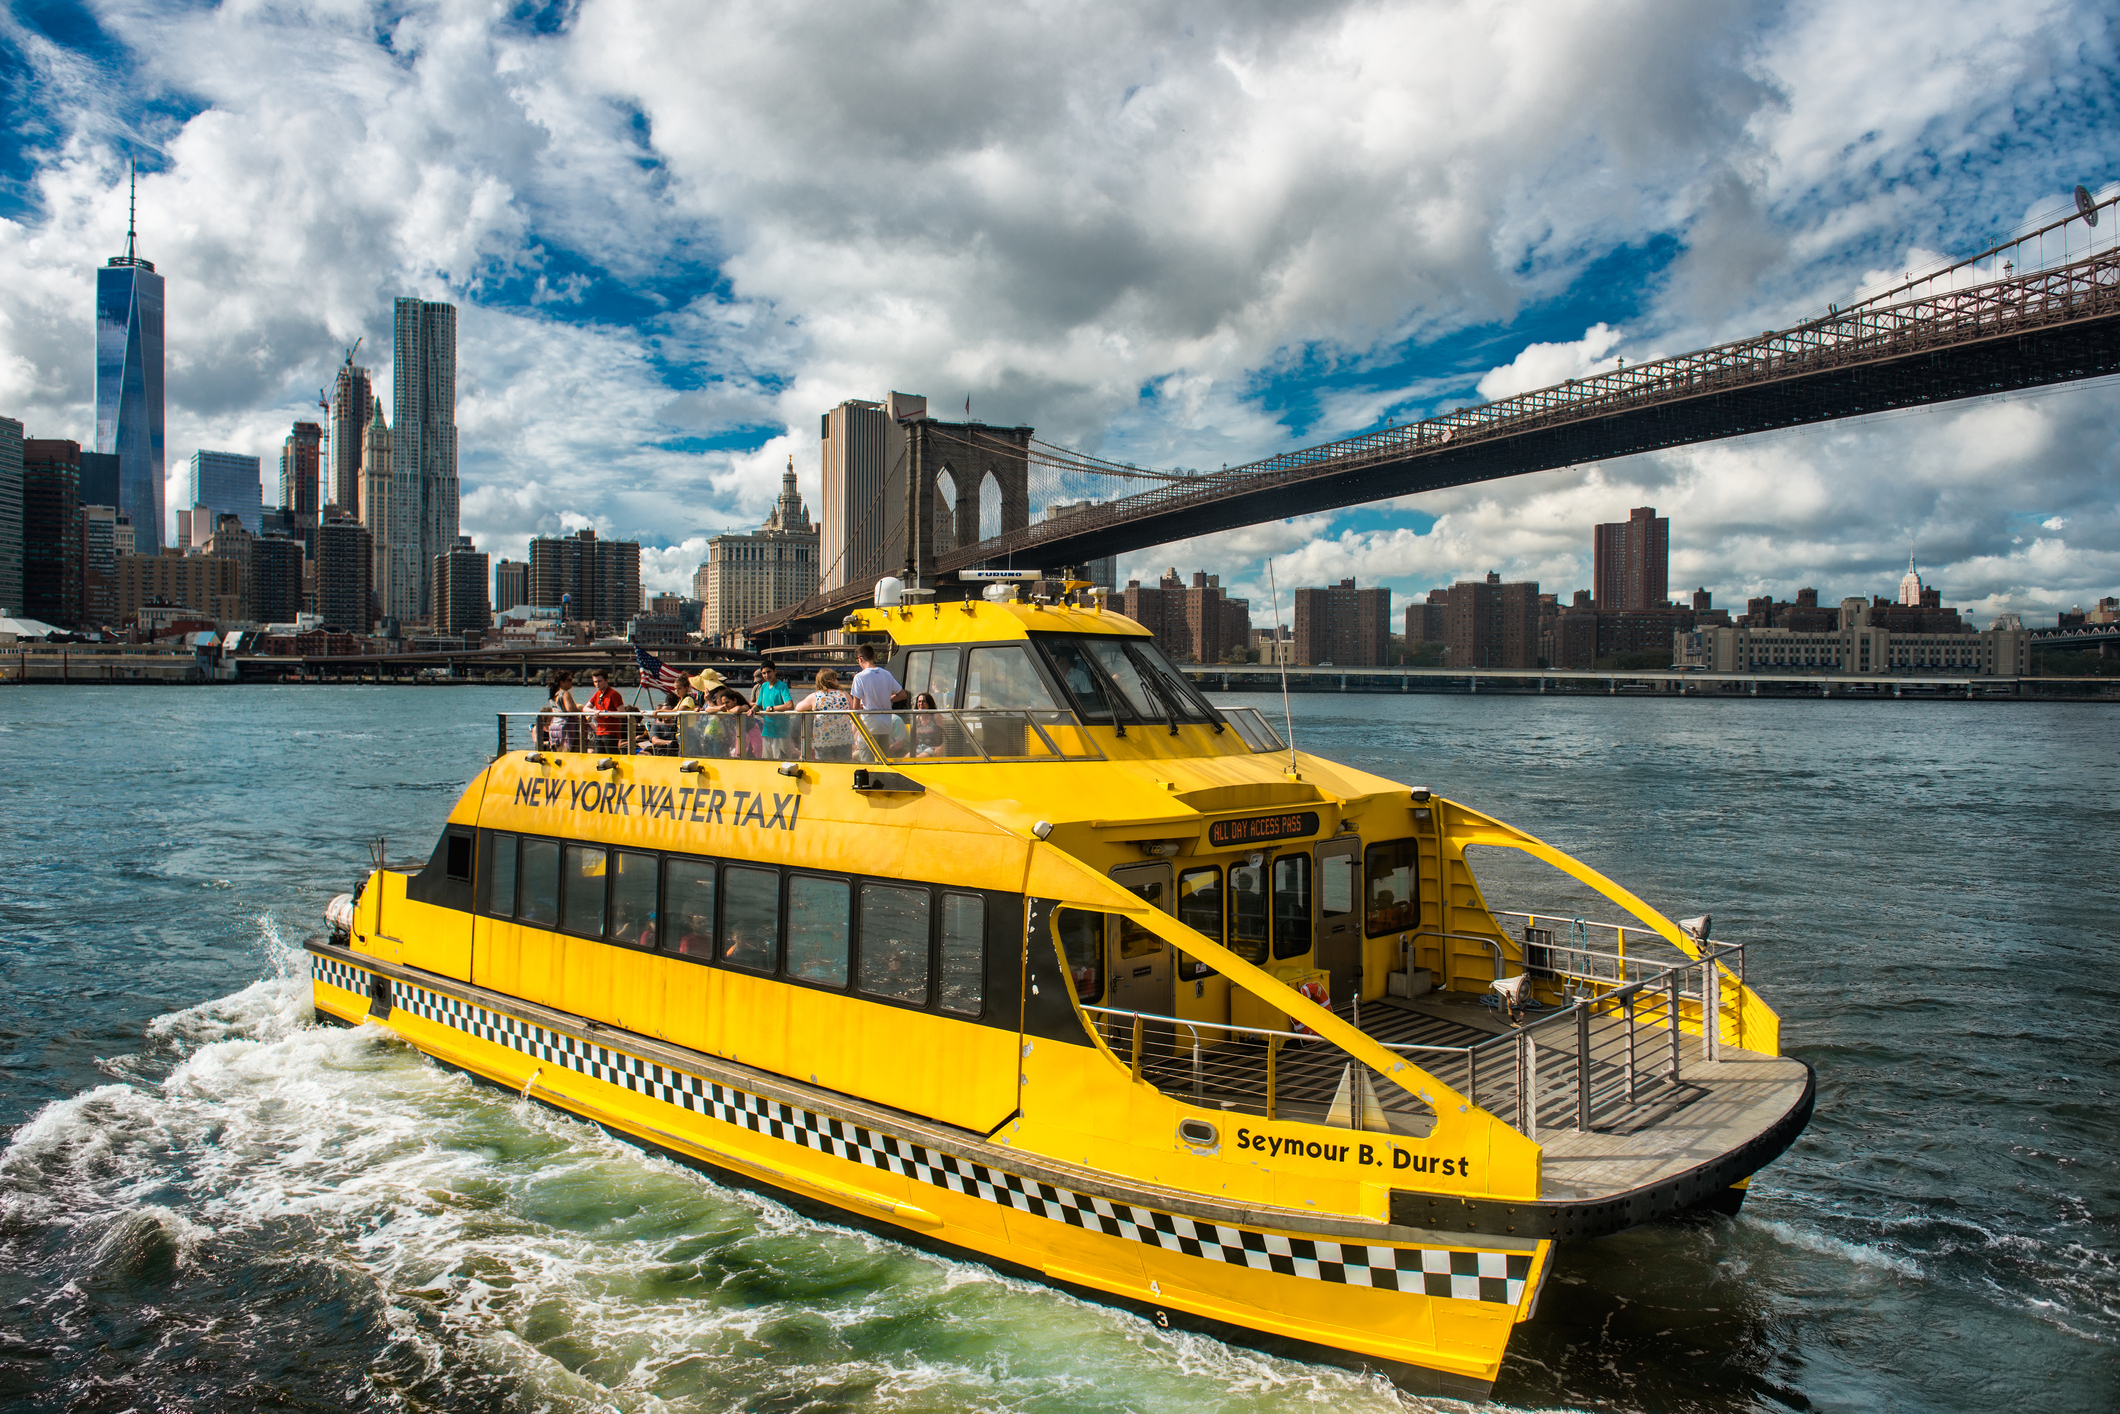 water taxi